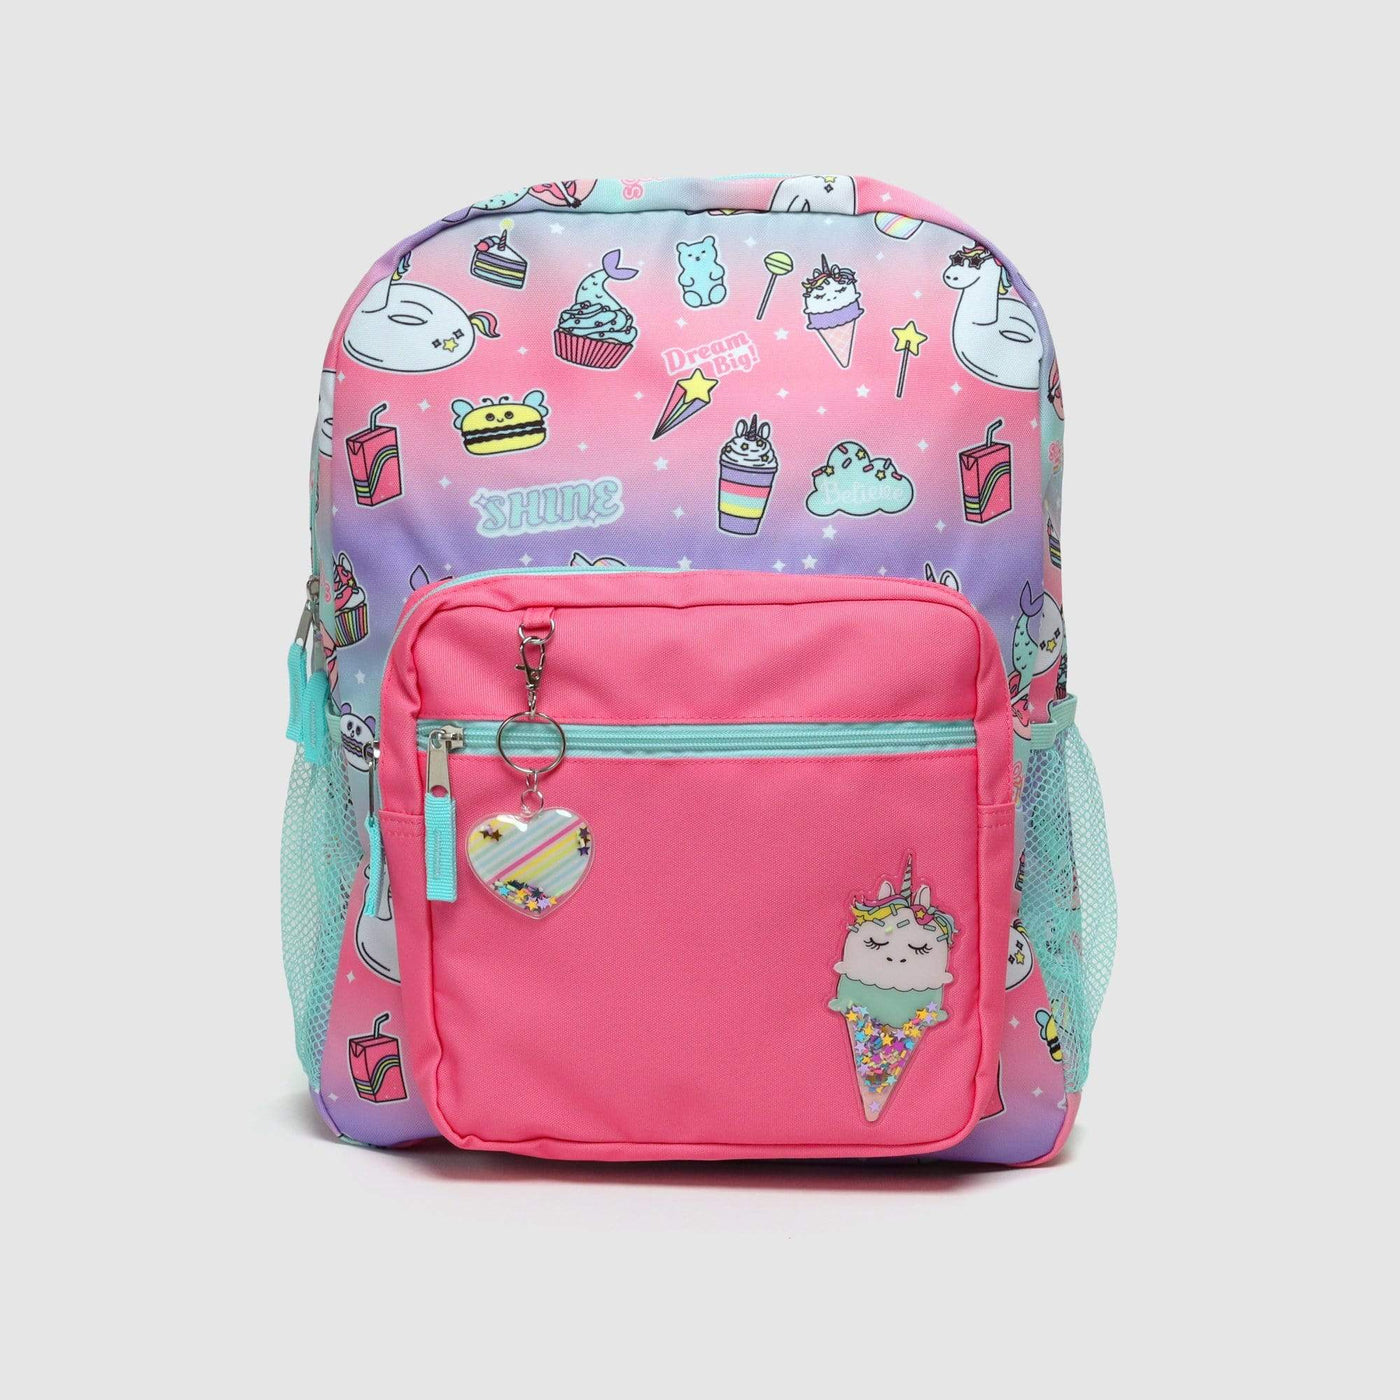 sweet dreams backpack with pink front zip pocket and aqua mesh side pockets to hold water bottle